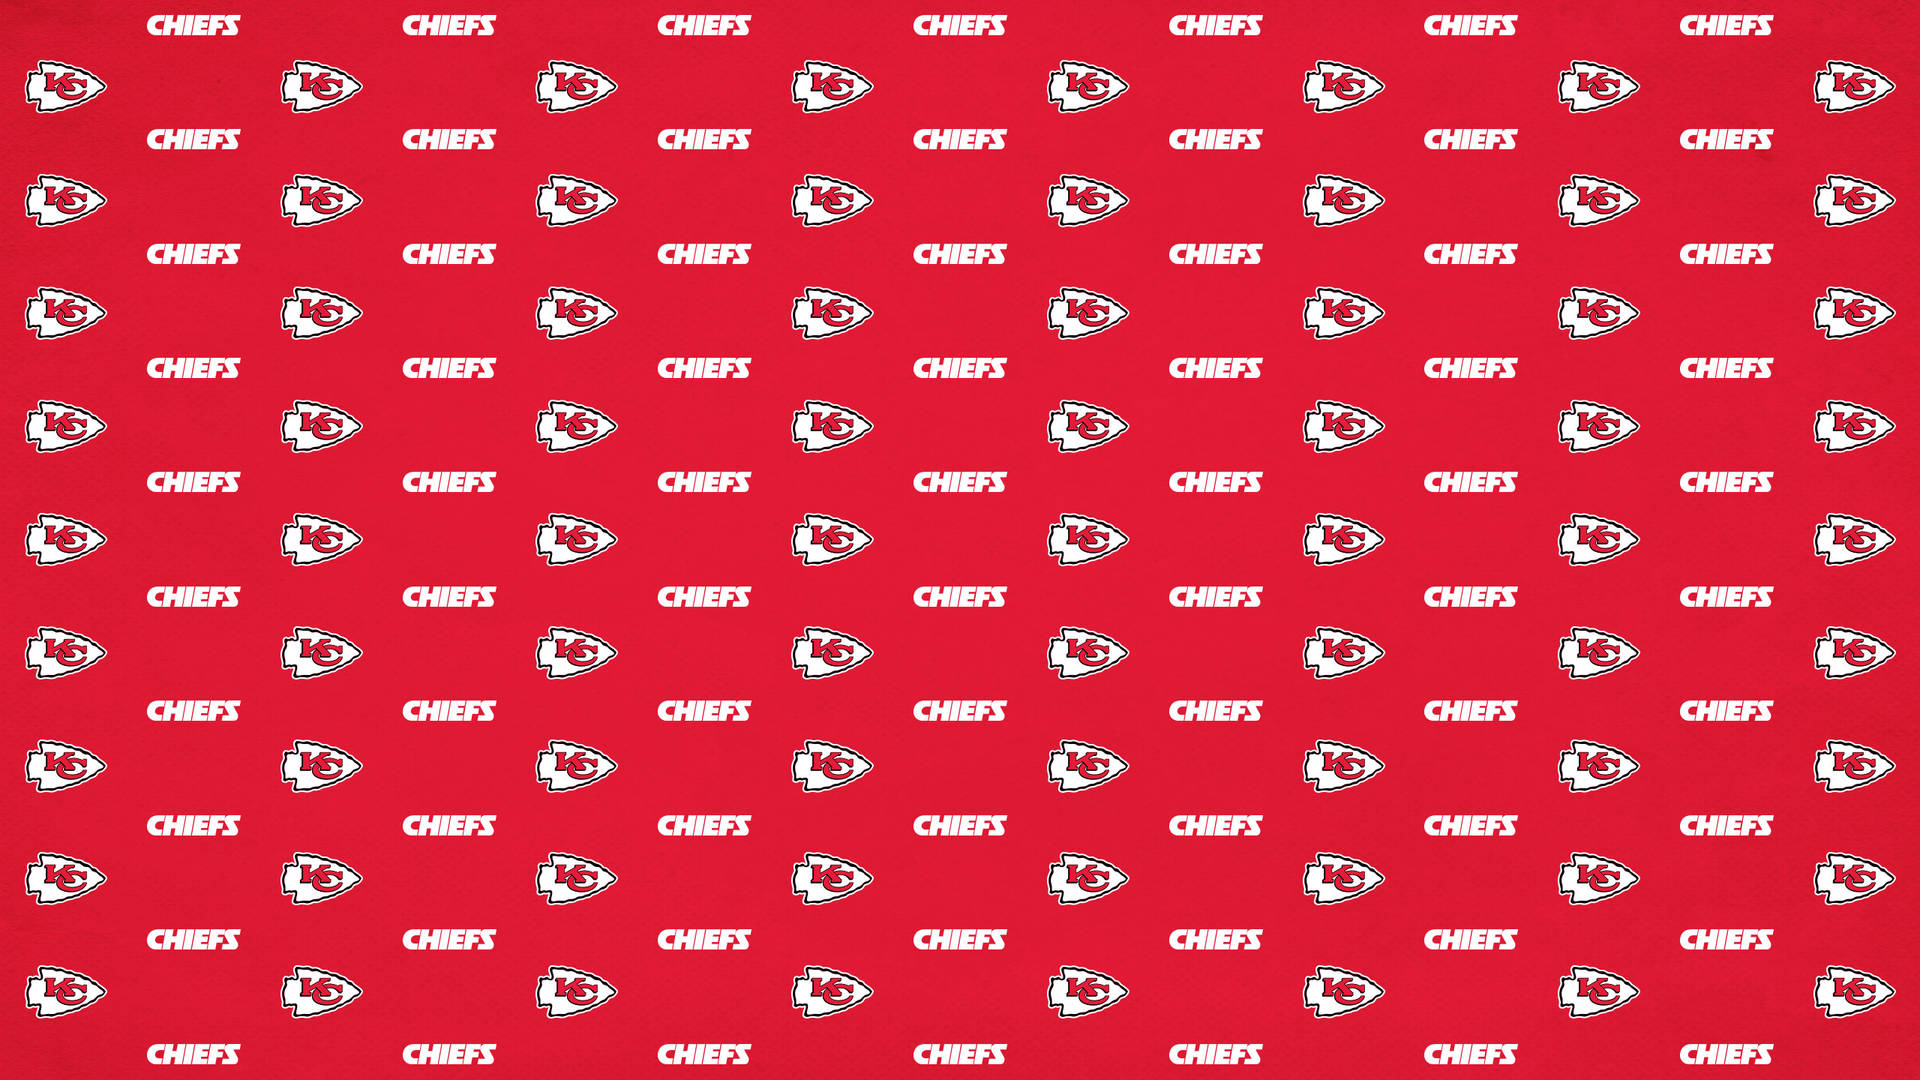 Be cool and show your pride for the Kansas City Chiefs this NFL season. Wallpaper